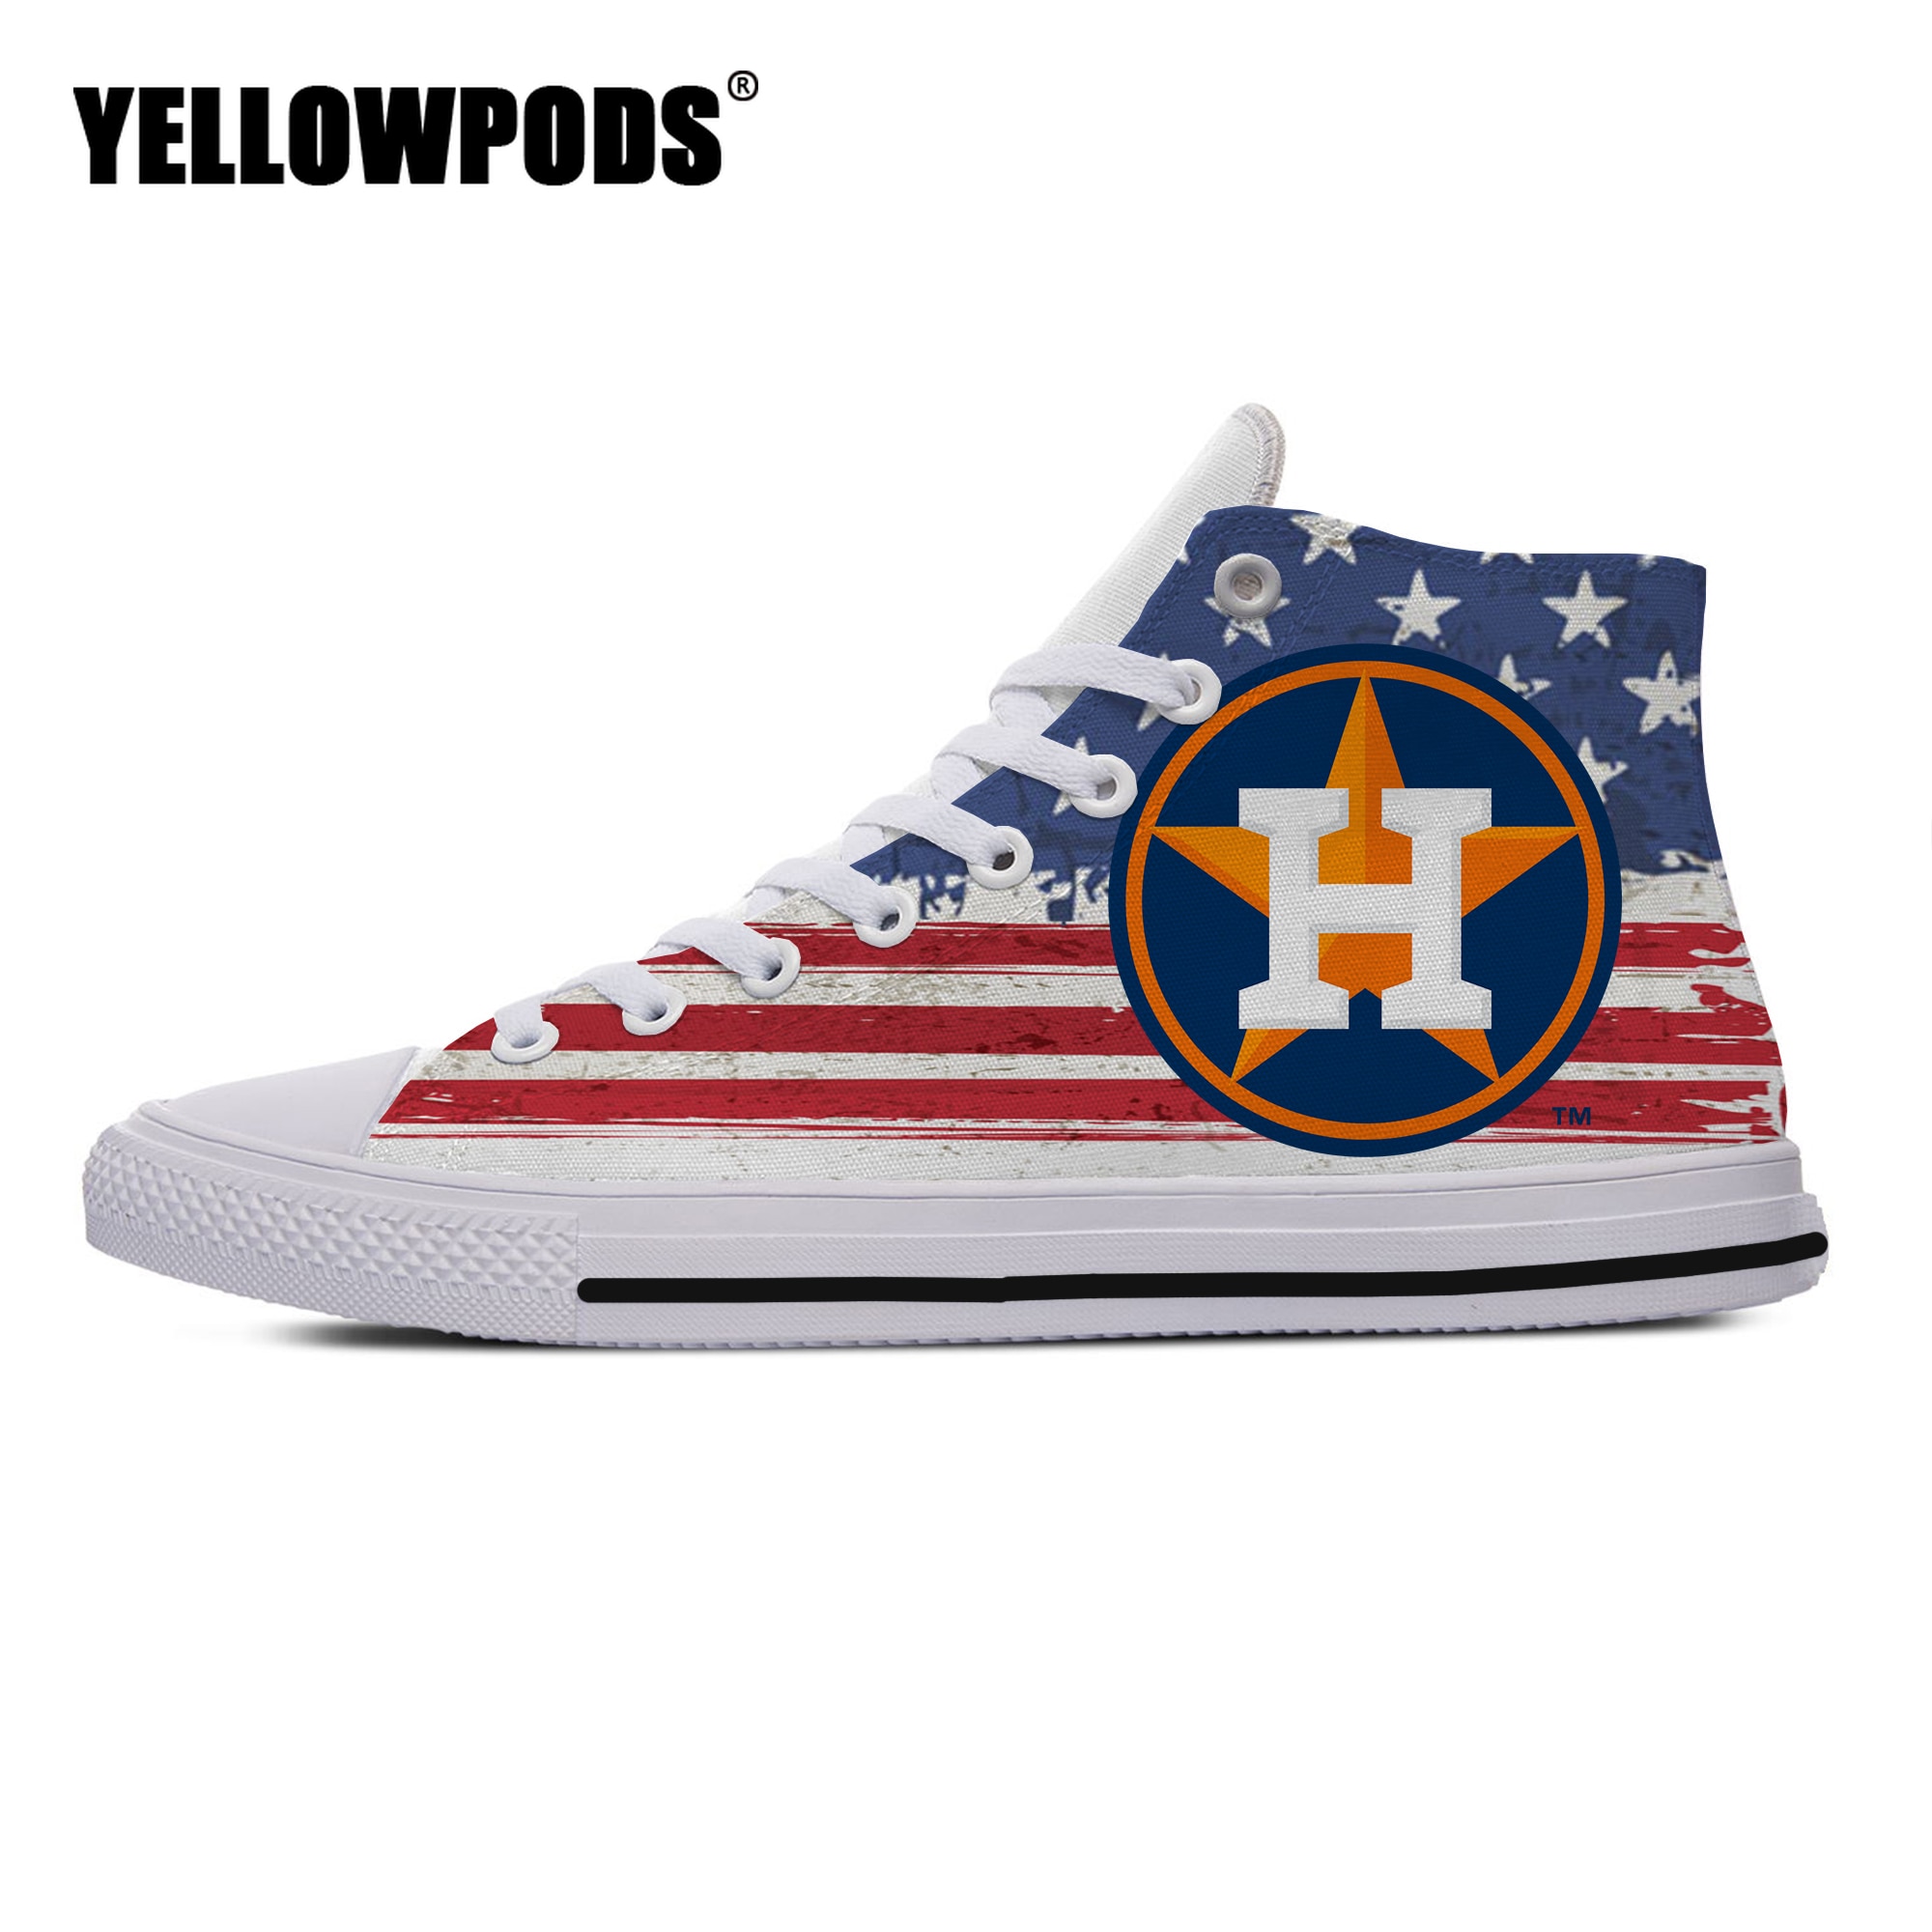 Sport Shoes for Women Pattern Astros Imges for Houston Fans Running Shoes Lightweight and Stylish Men Fashion Canvas Sneakers